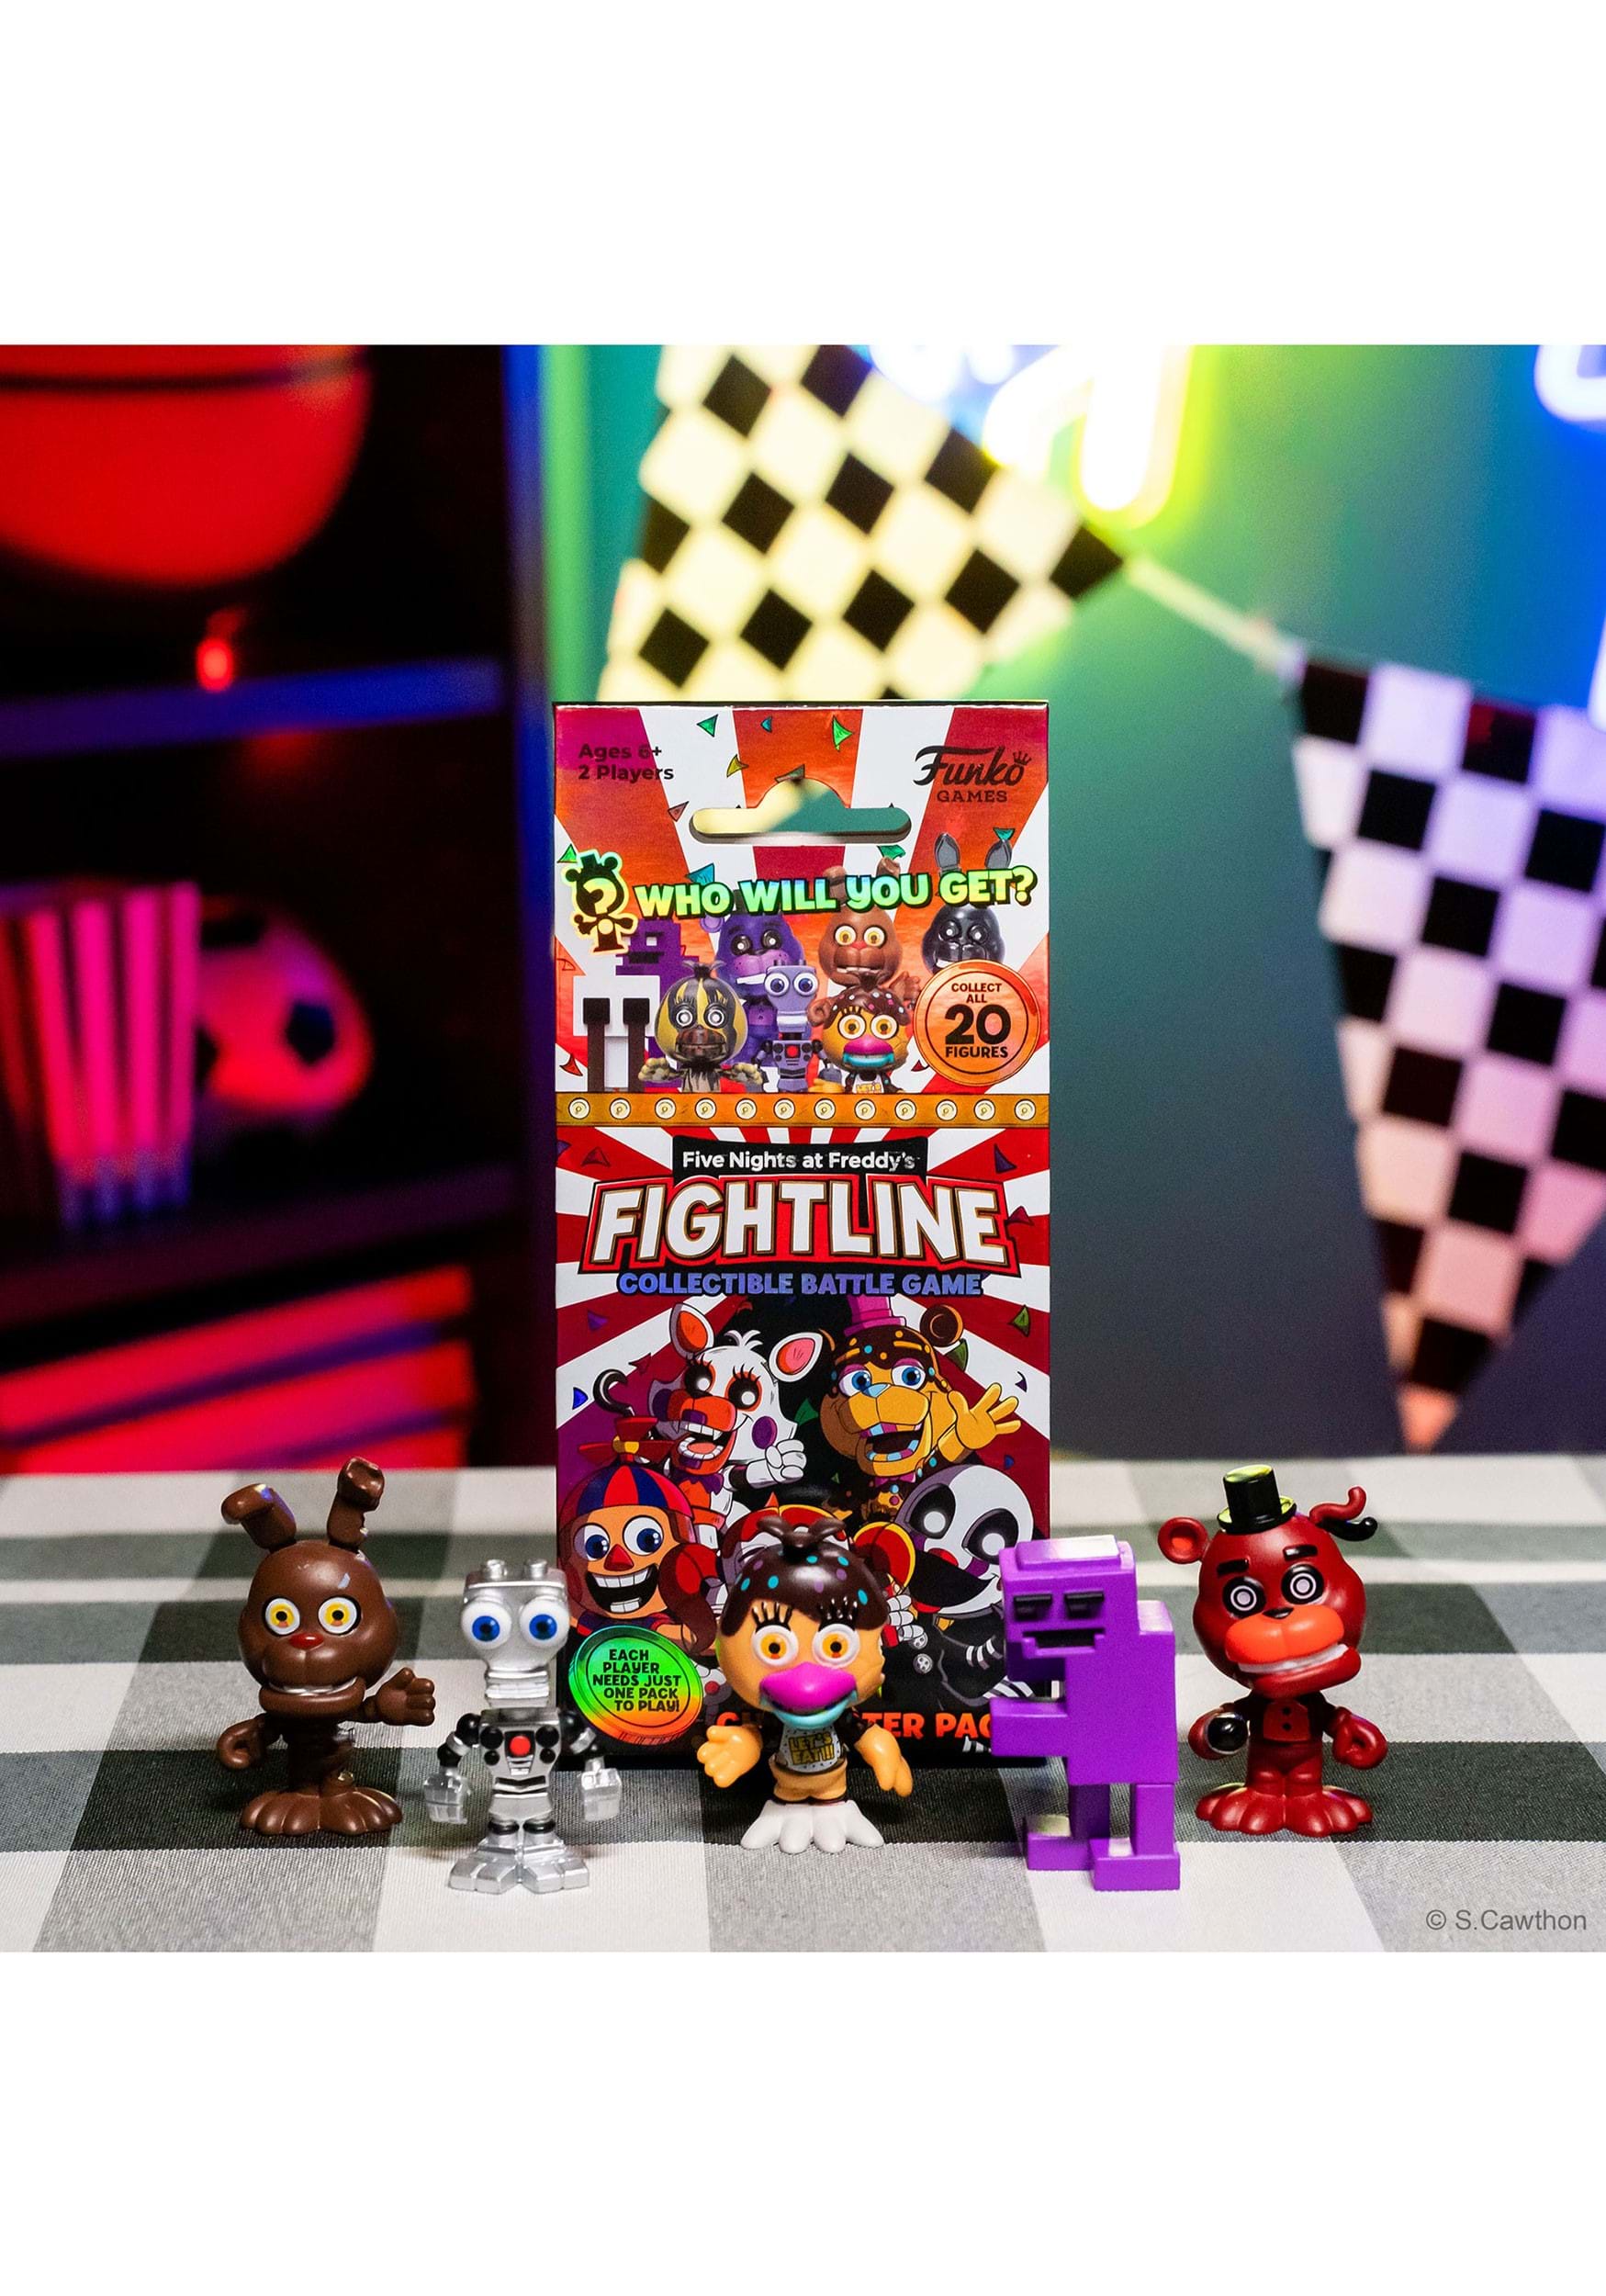 Funko Five Nights at Freddy's Fightline Character Pack